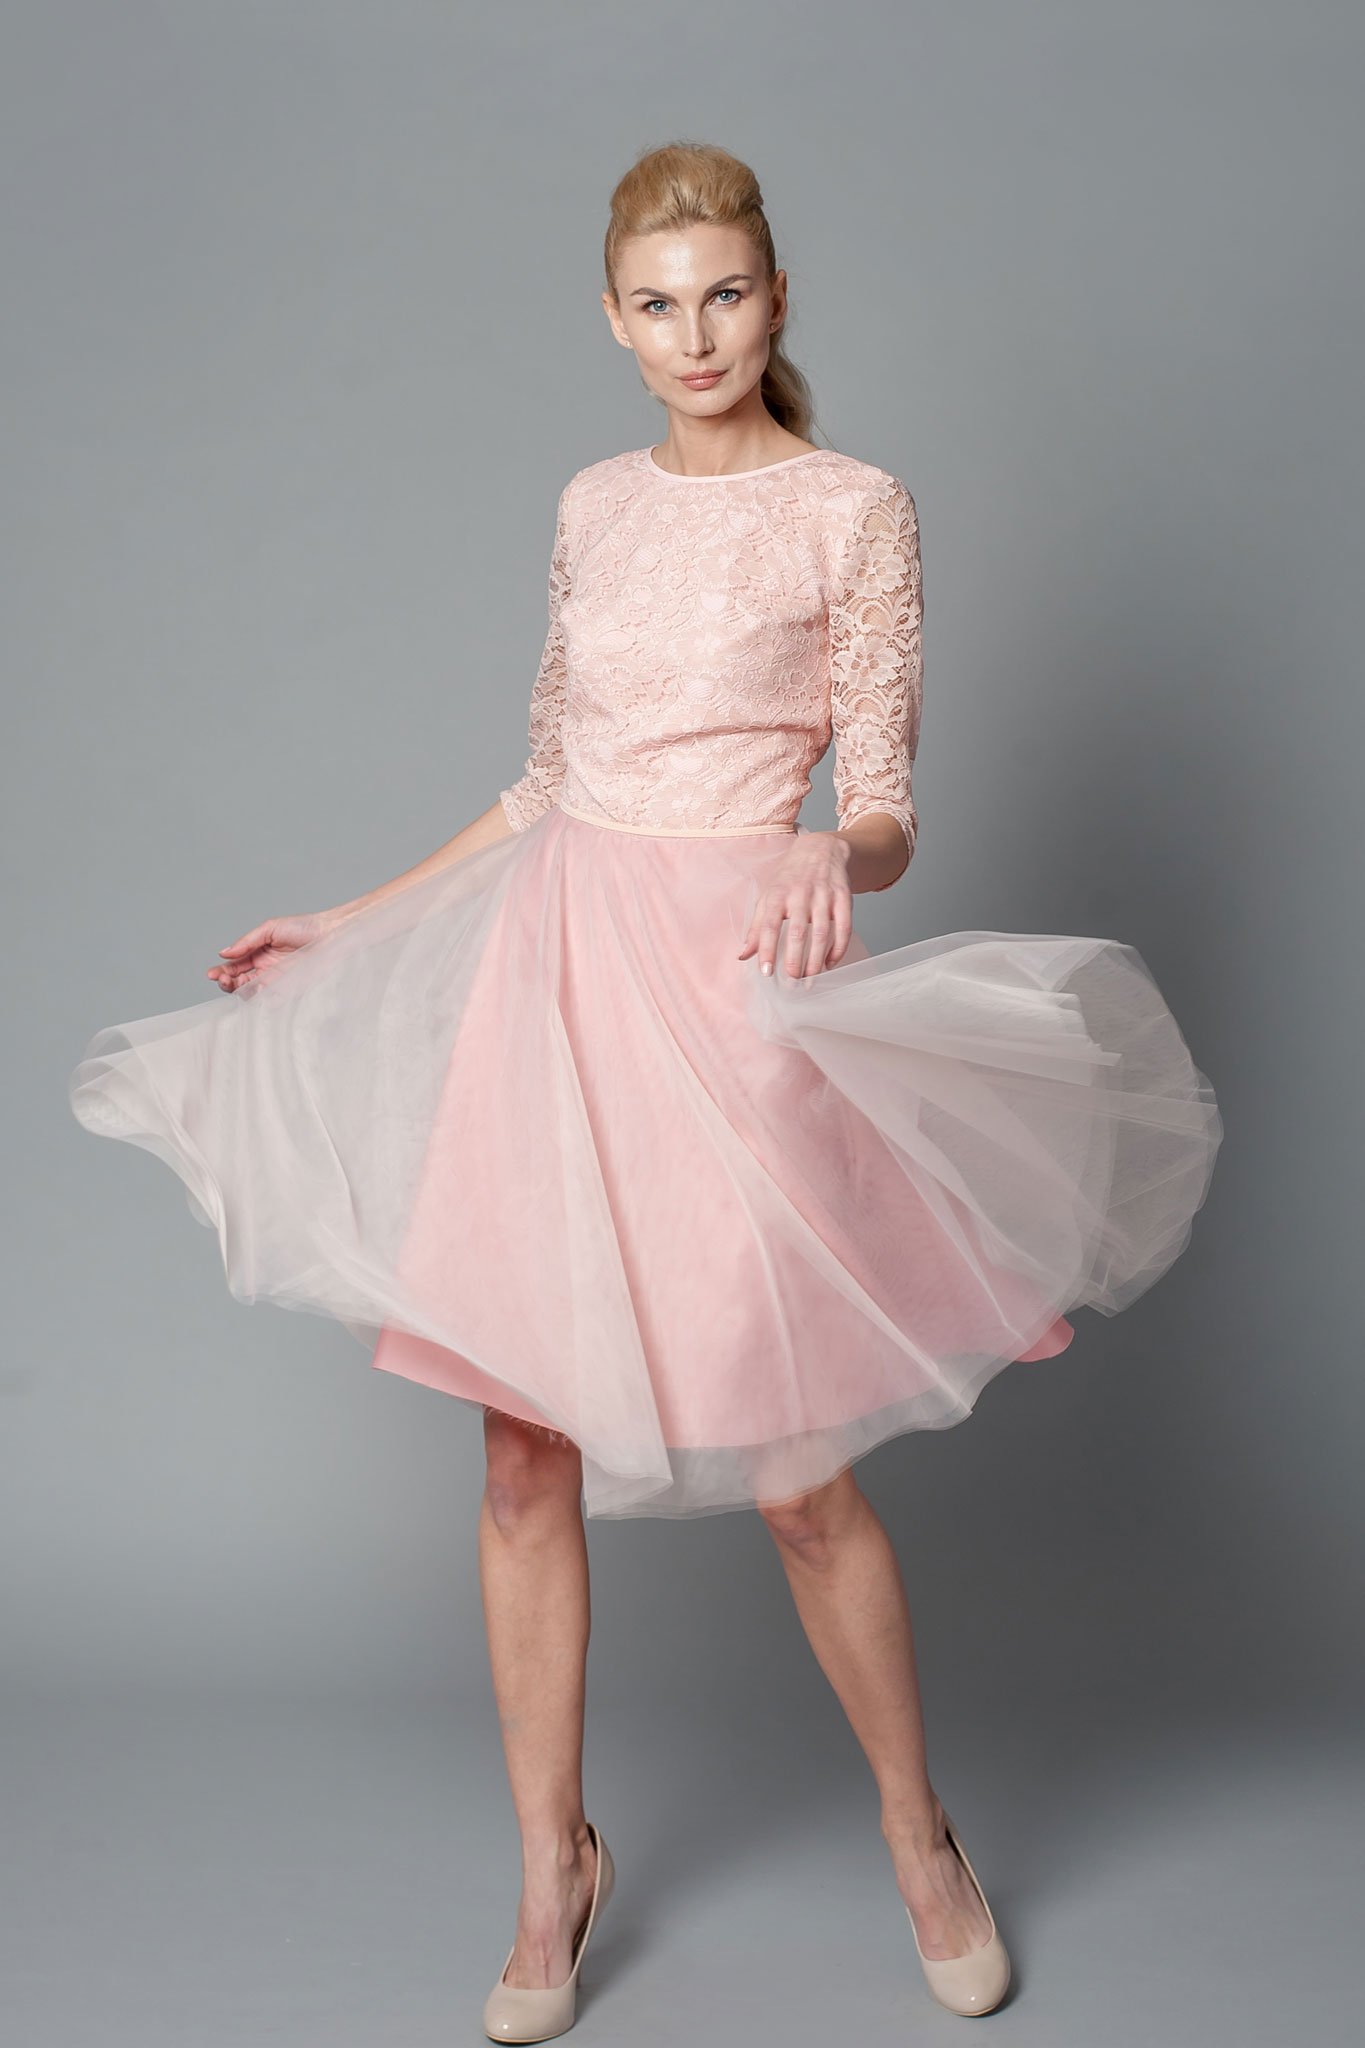 Blush Pink Midi Short Lace Overlay Dress With 3/4 Length